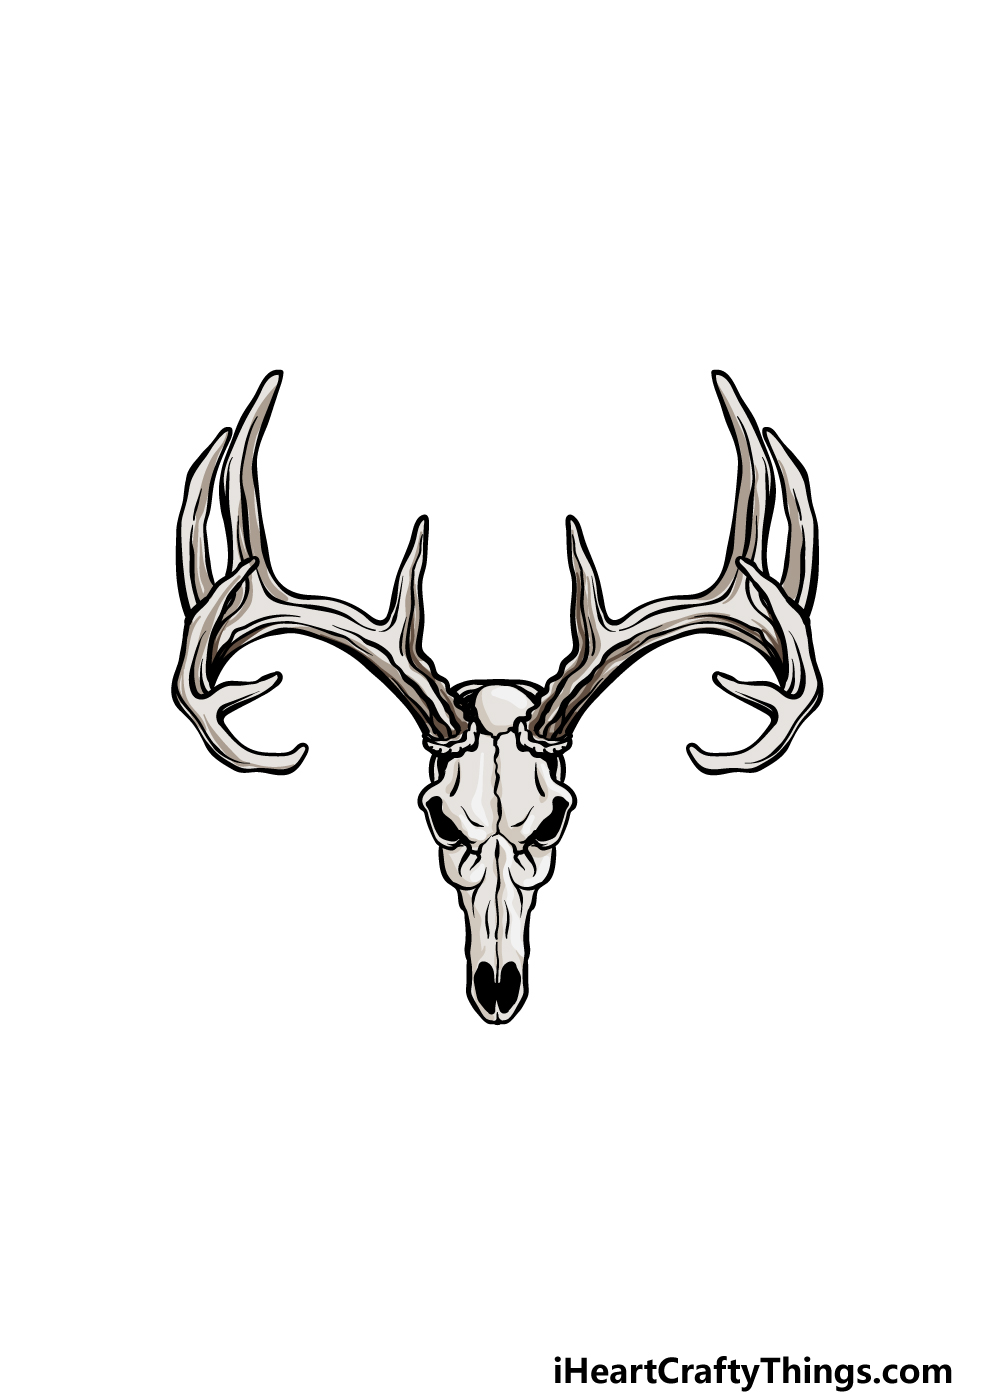 How To Draw A Deer Skull – A Step by Step Guide